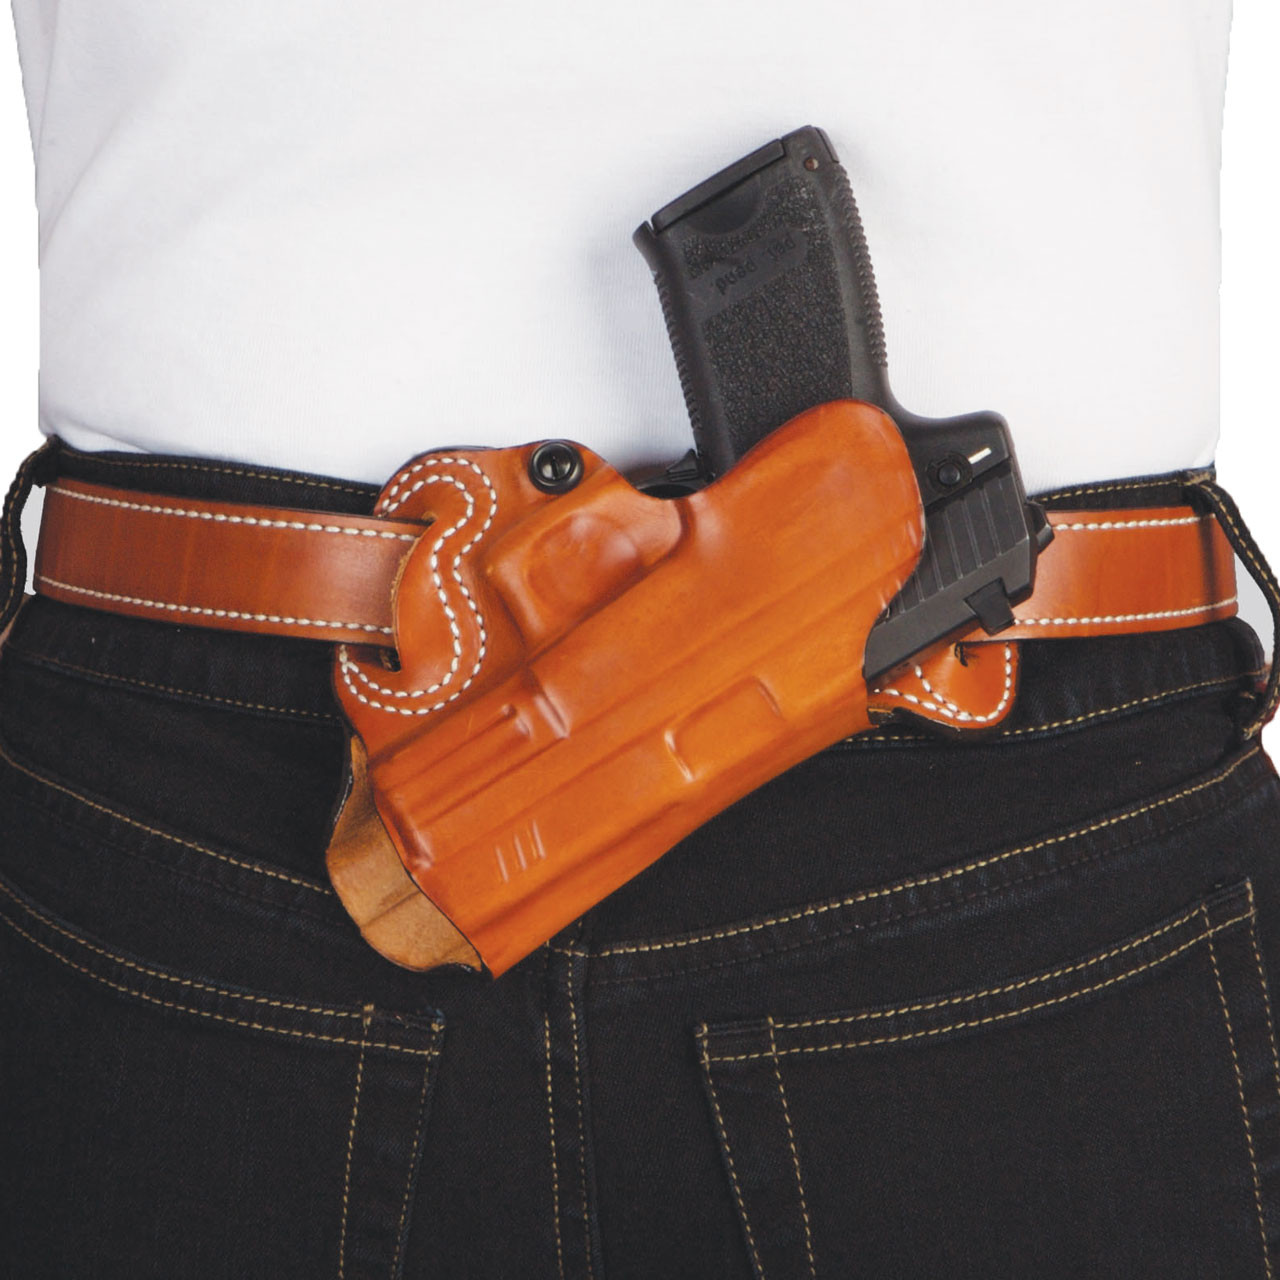 Can Can Holster Review